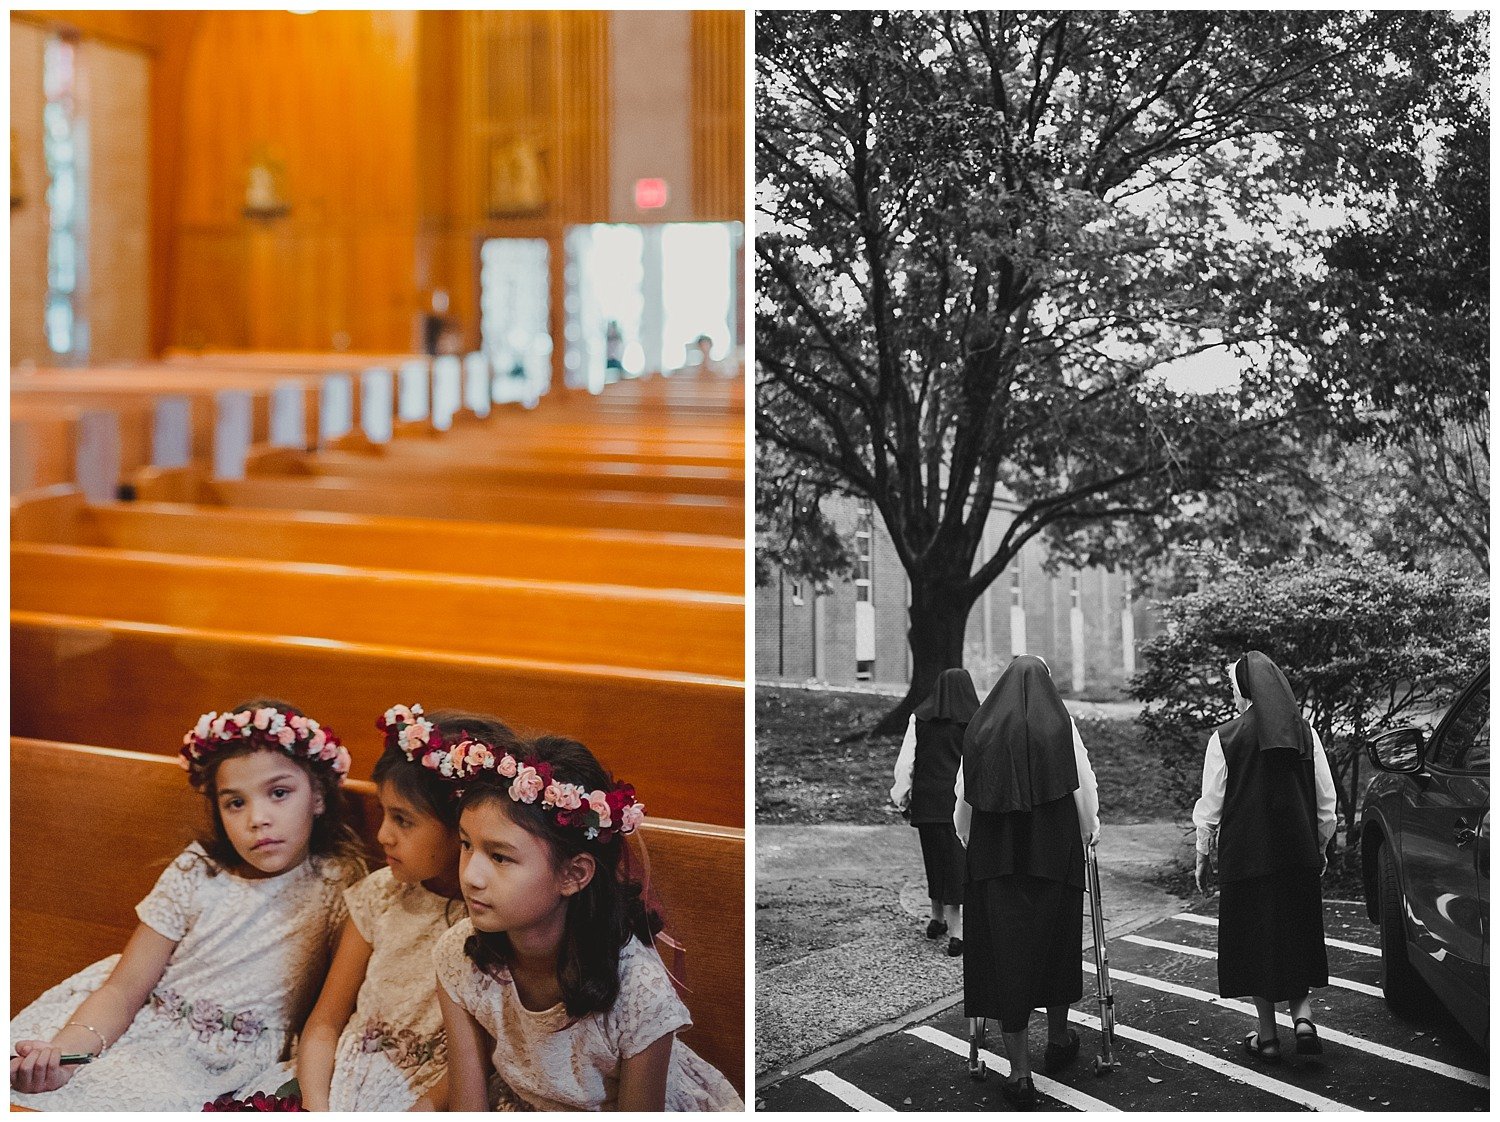 Pre ceremony flower girls and nuns at Immaculate Conception Chapel at Oblate School of Theology -Philip Thomas